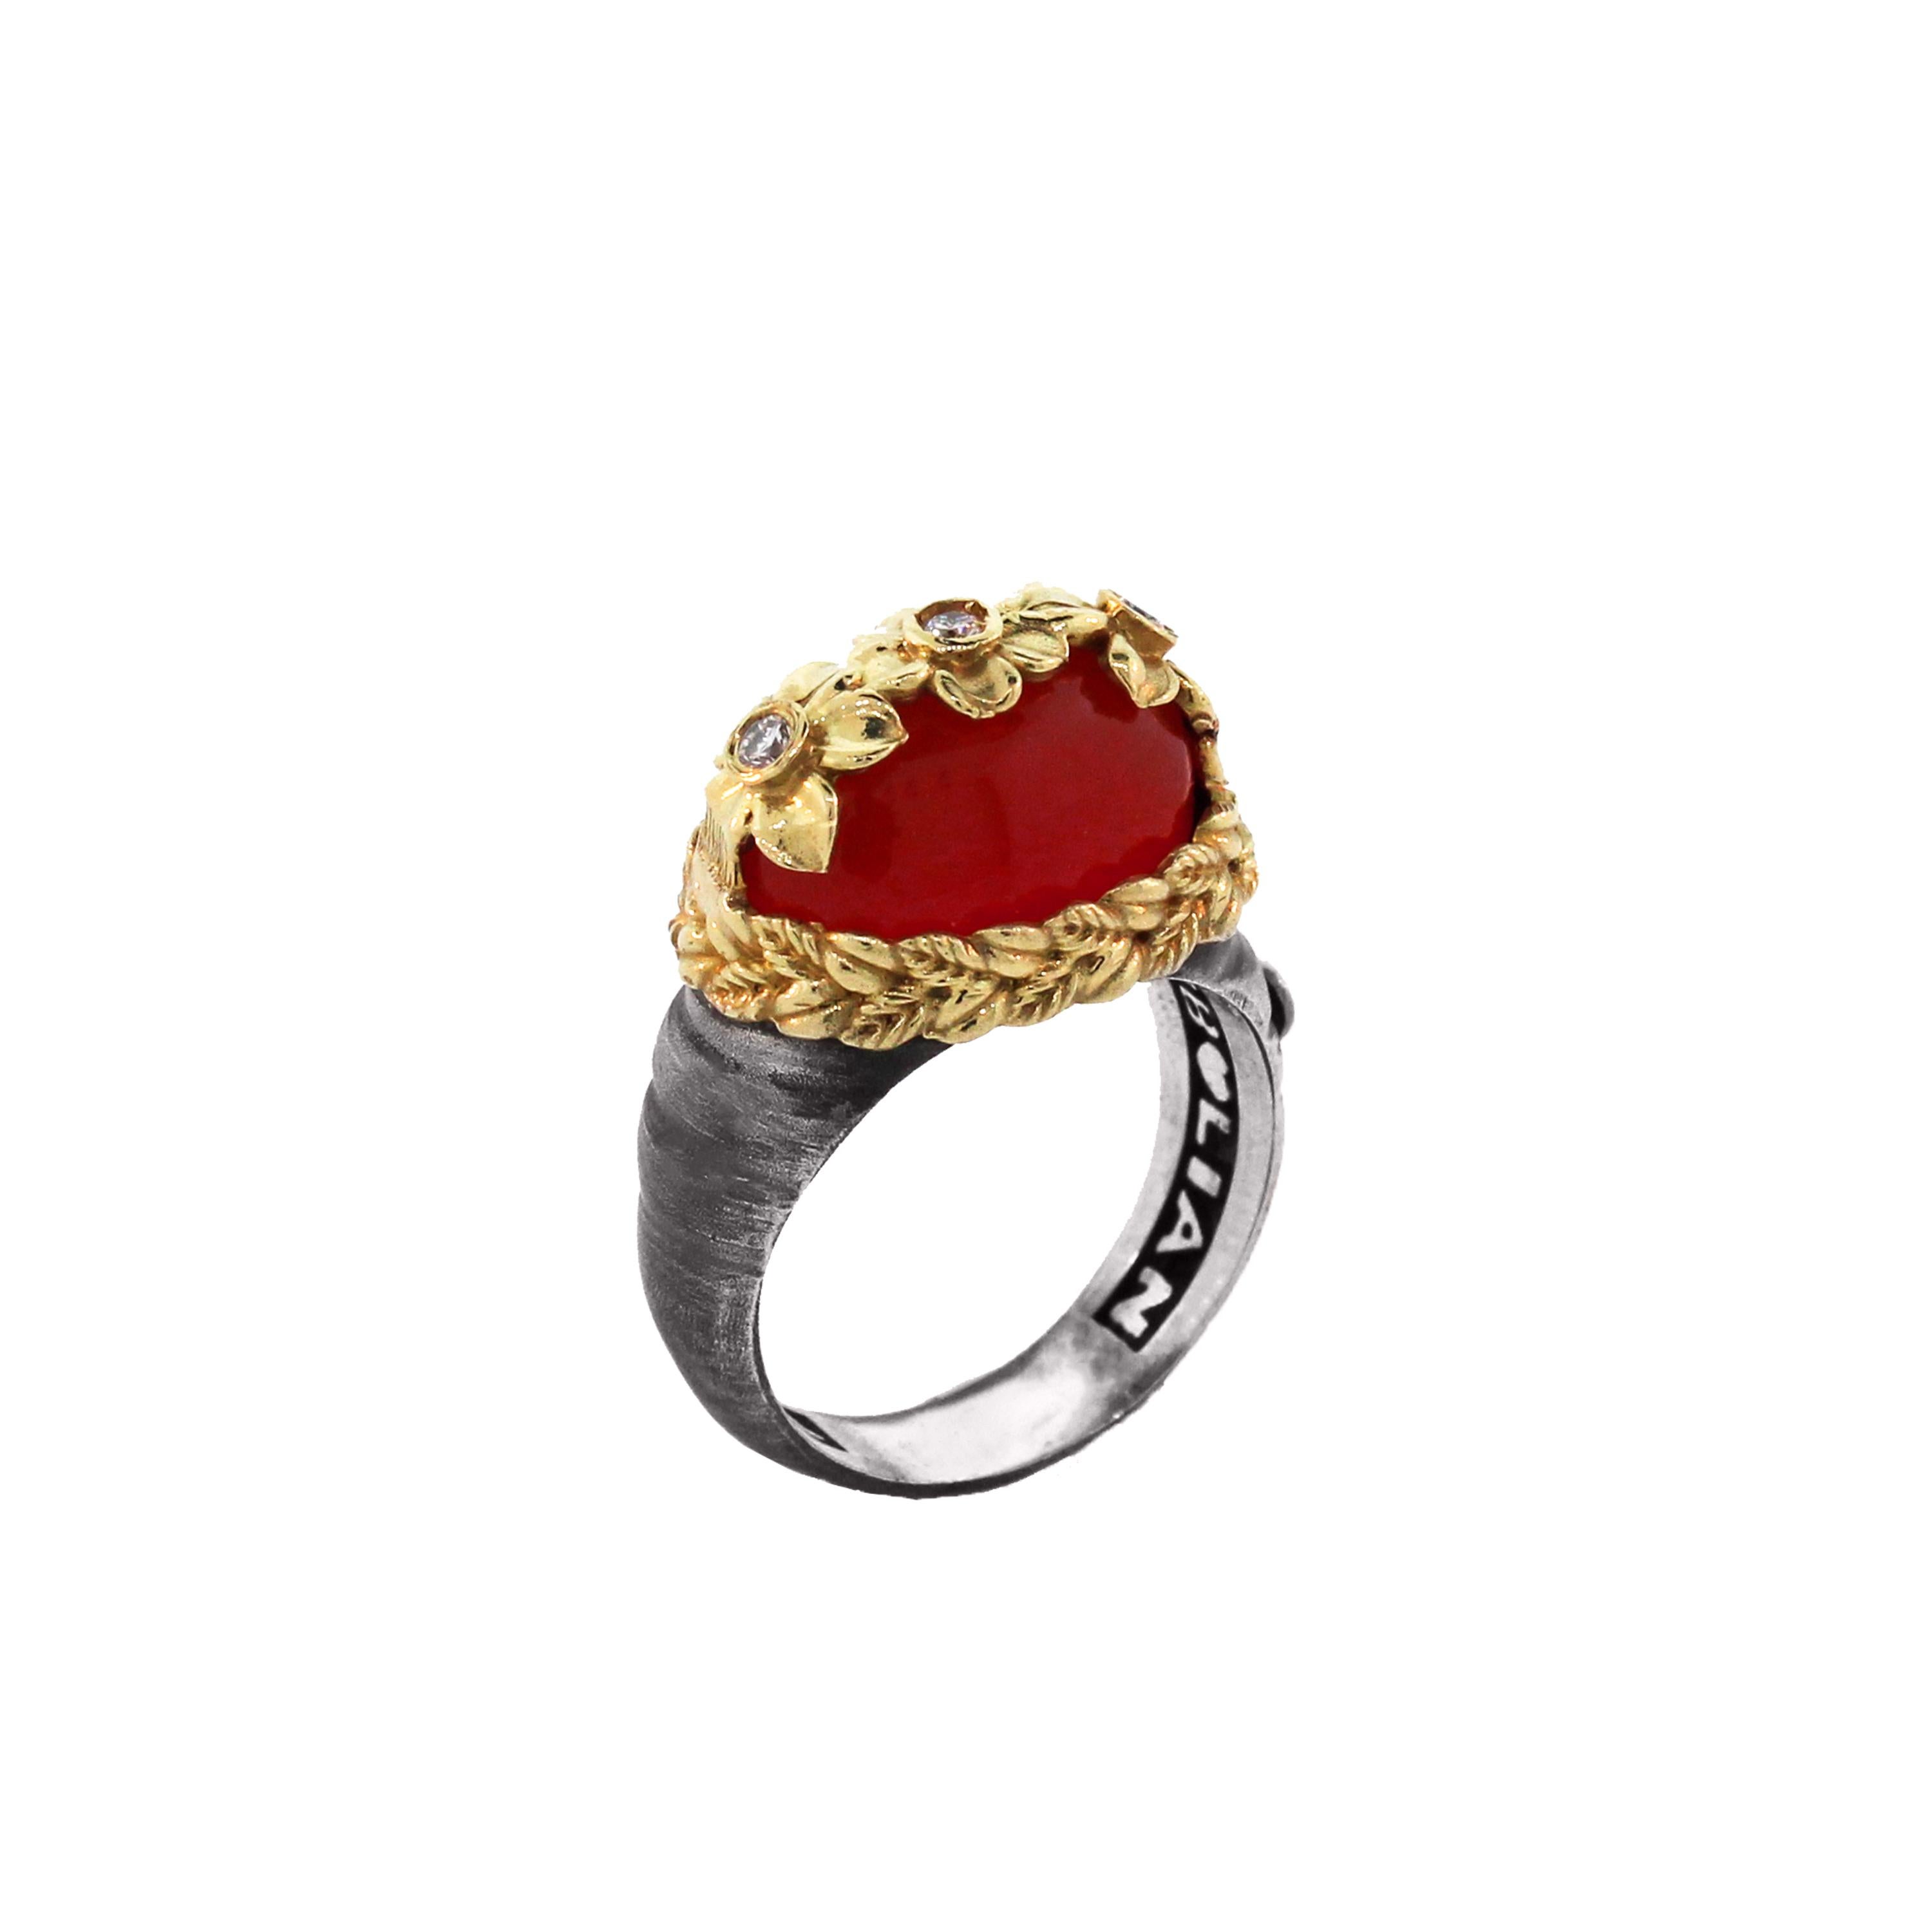 Round Cut Carnelian and Diamond Floral Ring with Sterling Silver and Gold Stambolian